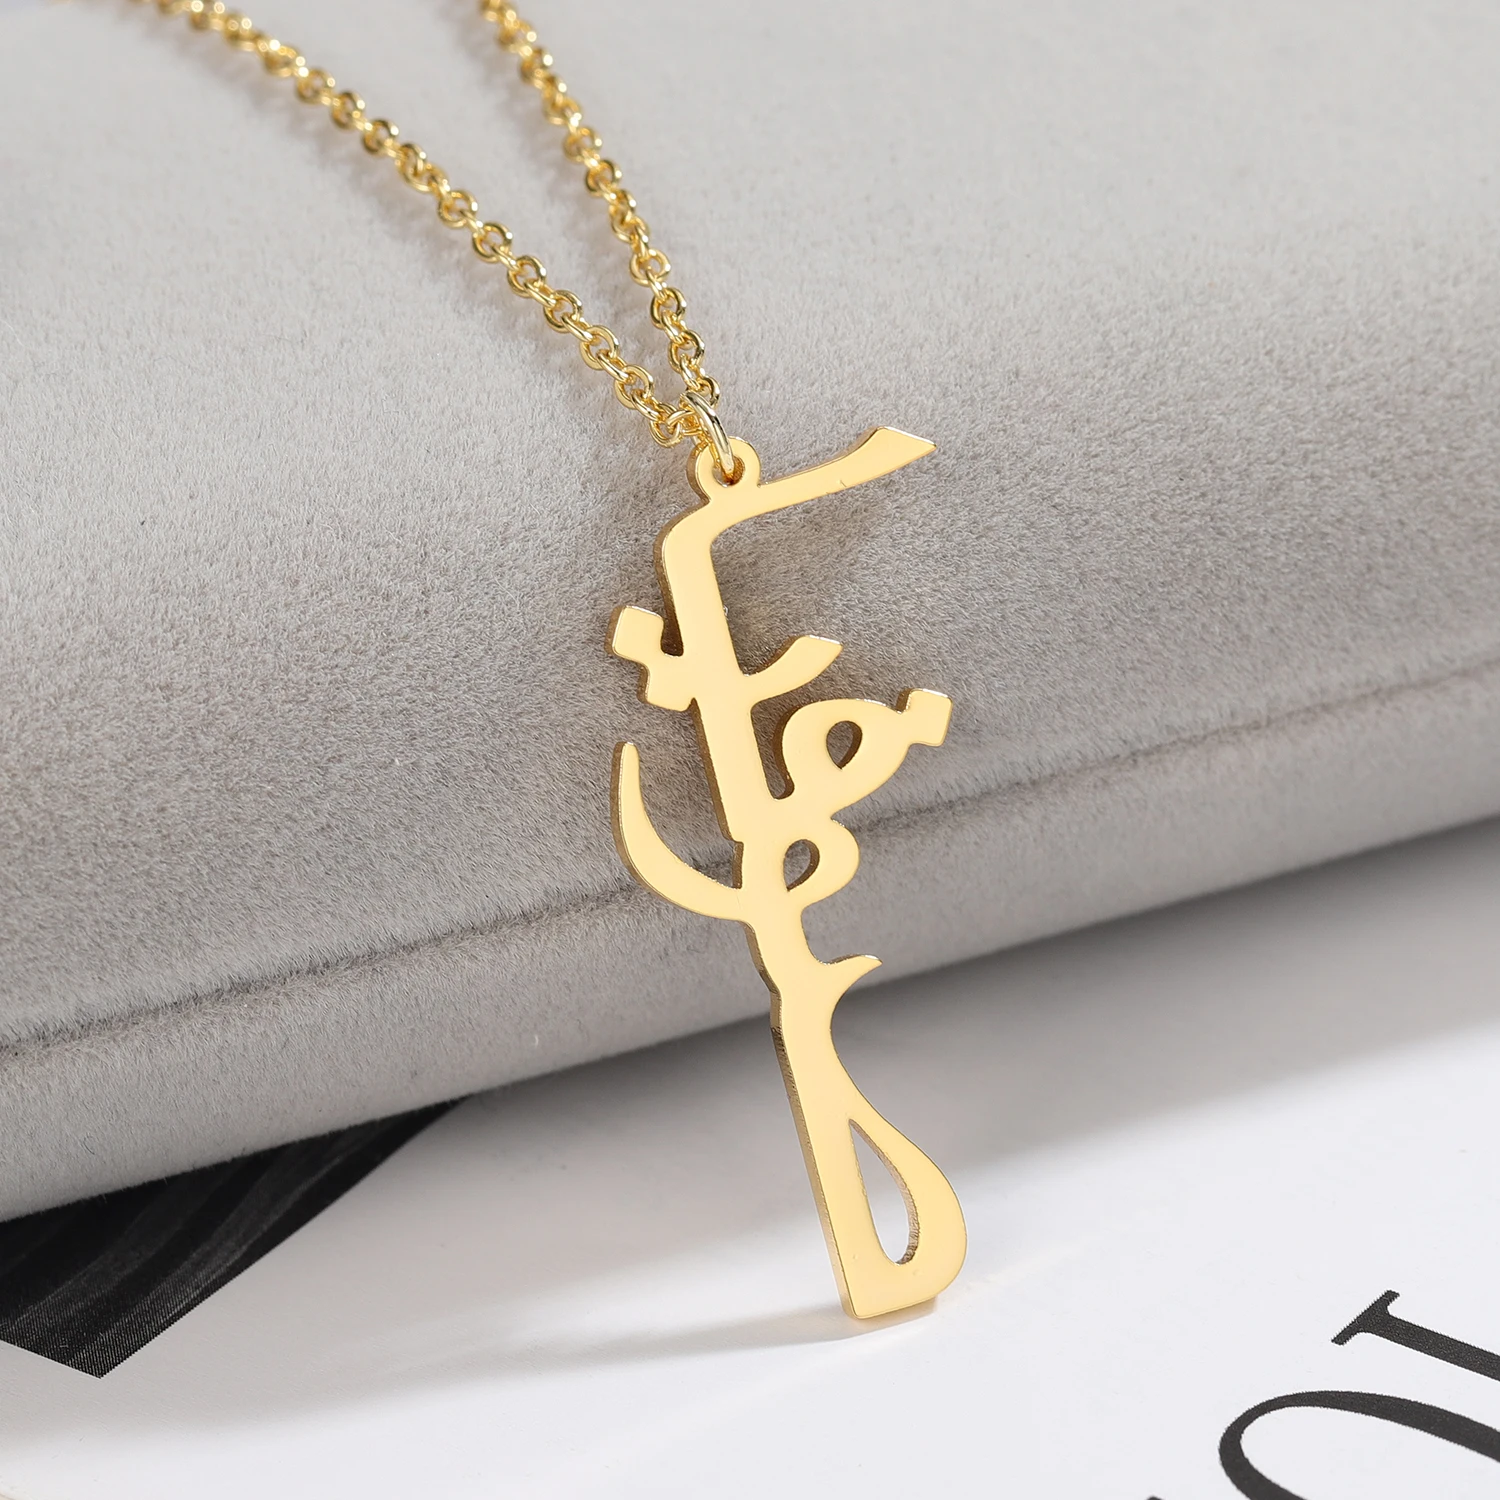 

Customize Stainless Steel Jewelry Name Necklace Arabic Personalized Nameplate Pendant Gold Chain Choker Jewelry Handmade Gifts